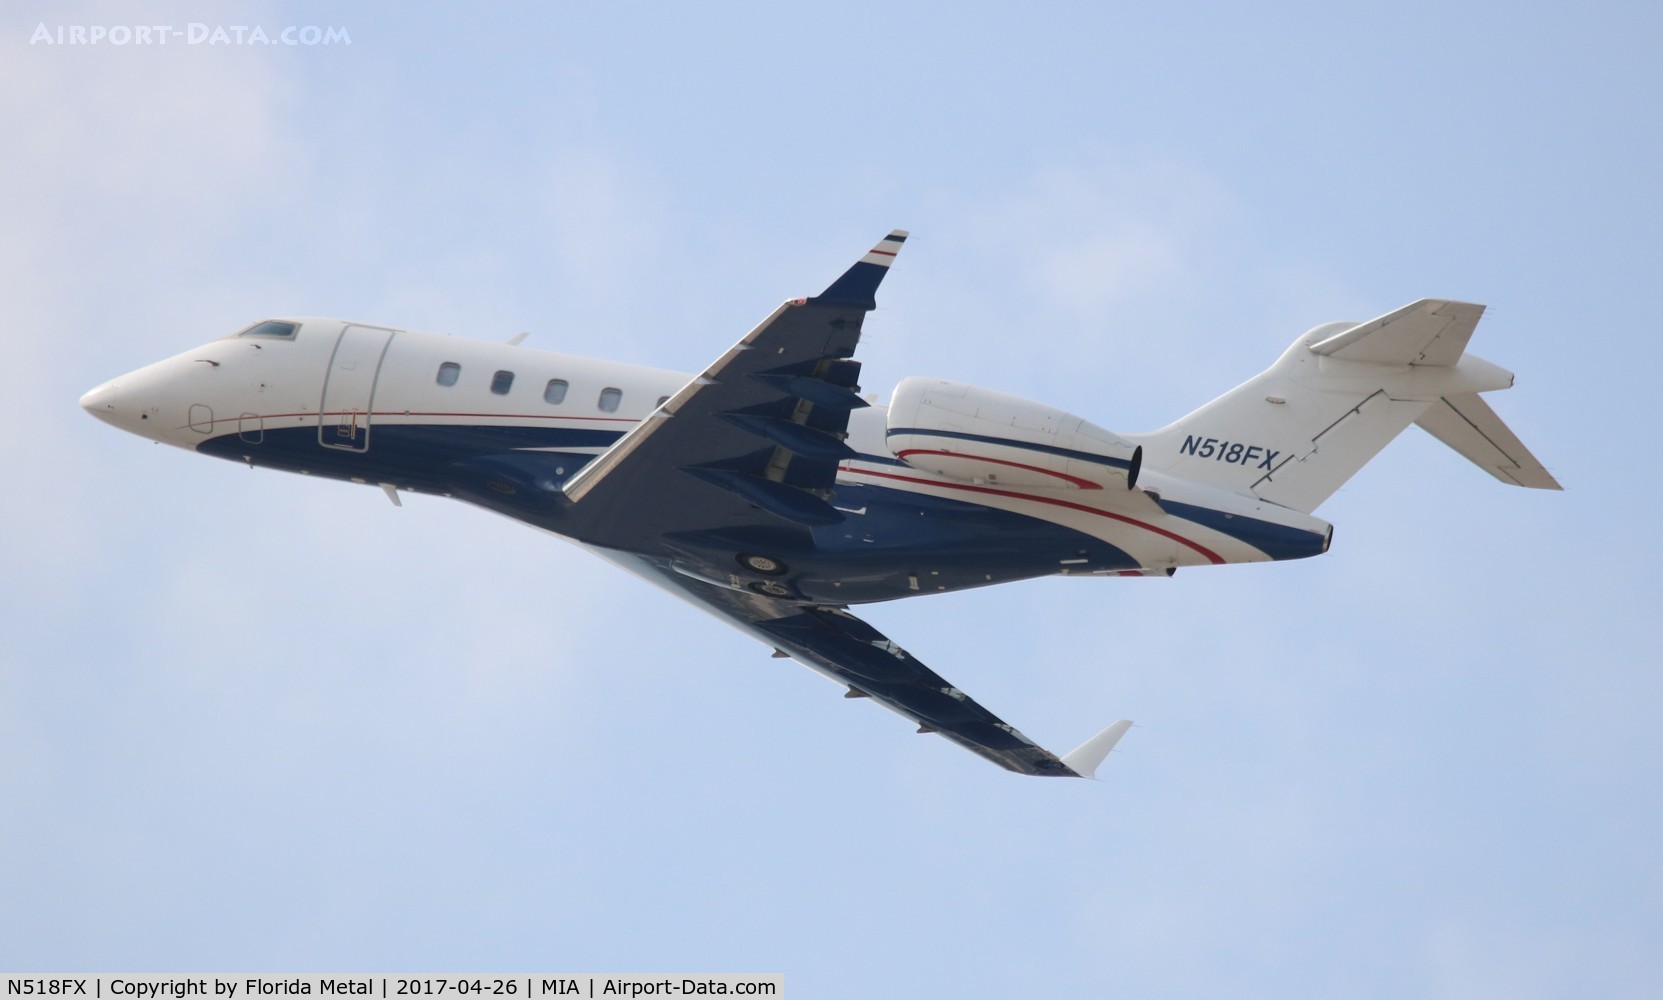 N518FX, 2005 Bombardier Challenger 300 (BD-100-1A10) C/N 20046, Challenger 300